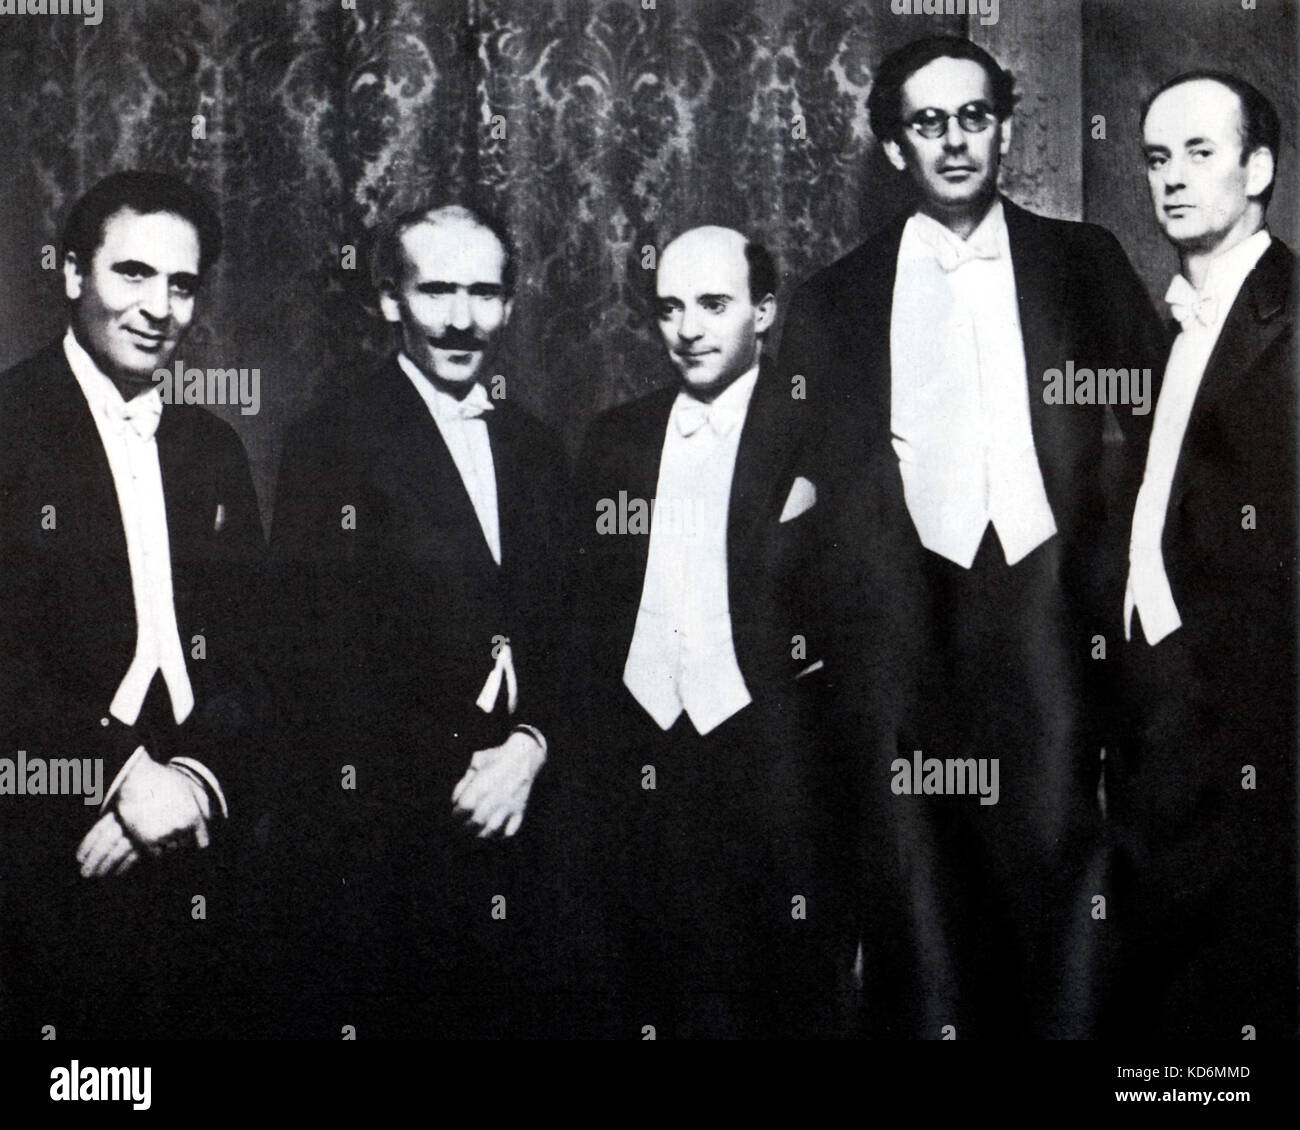 Composers '  gathering in Berlin 1930 with l to r - Bruno Walter, Arturo Toscanini, Erich Kleiber, Otto Klemperer, Wilhelm Furtwangler Stock Photo